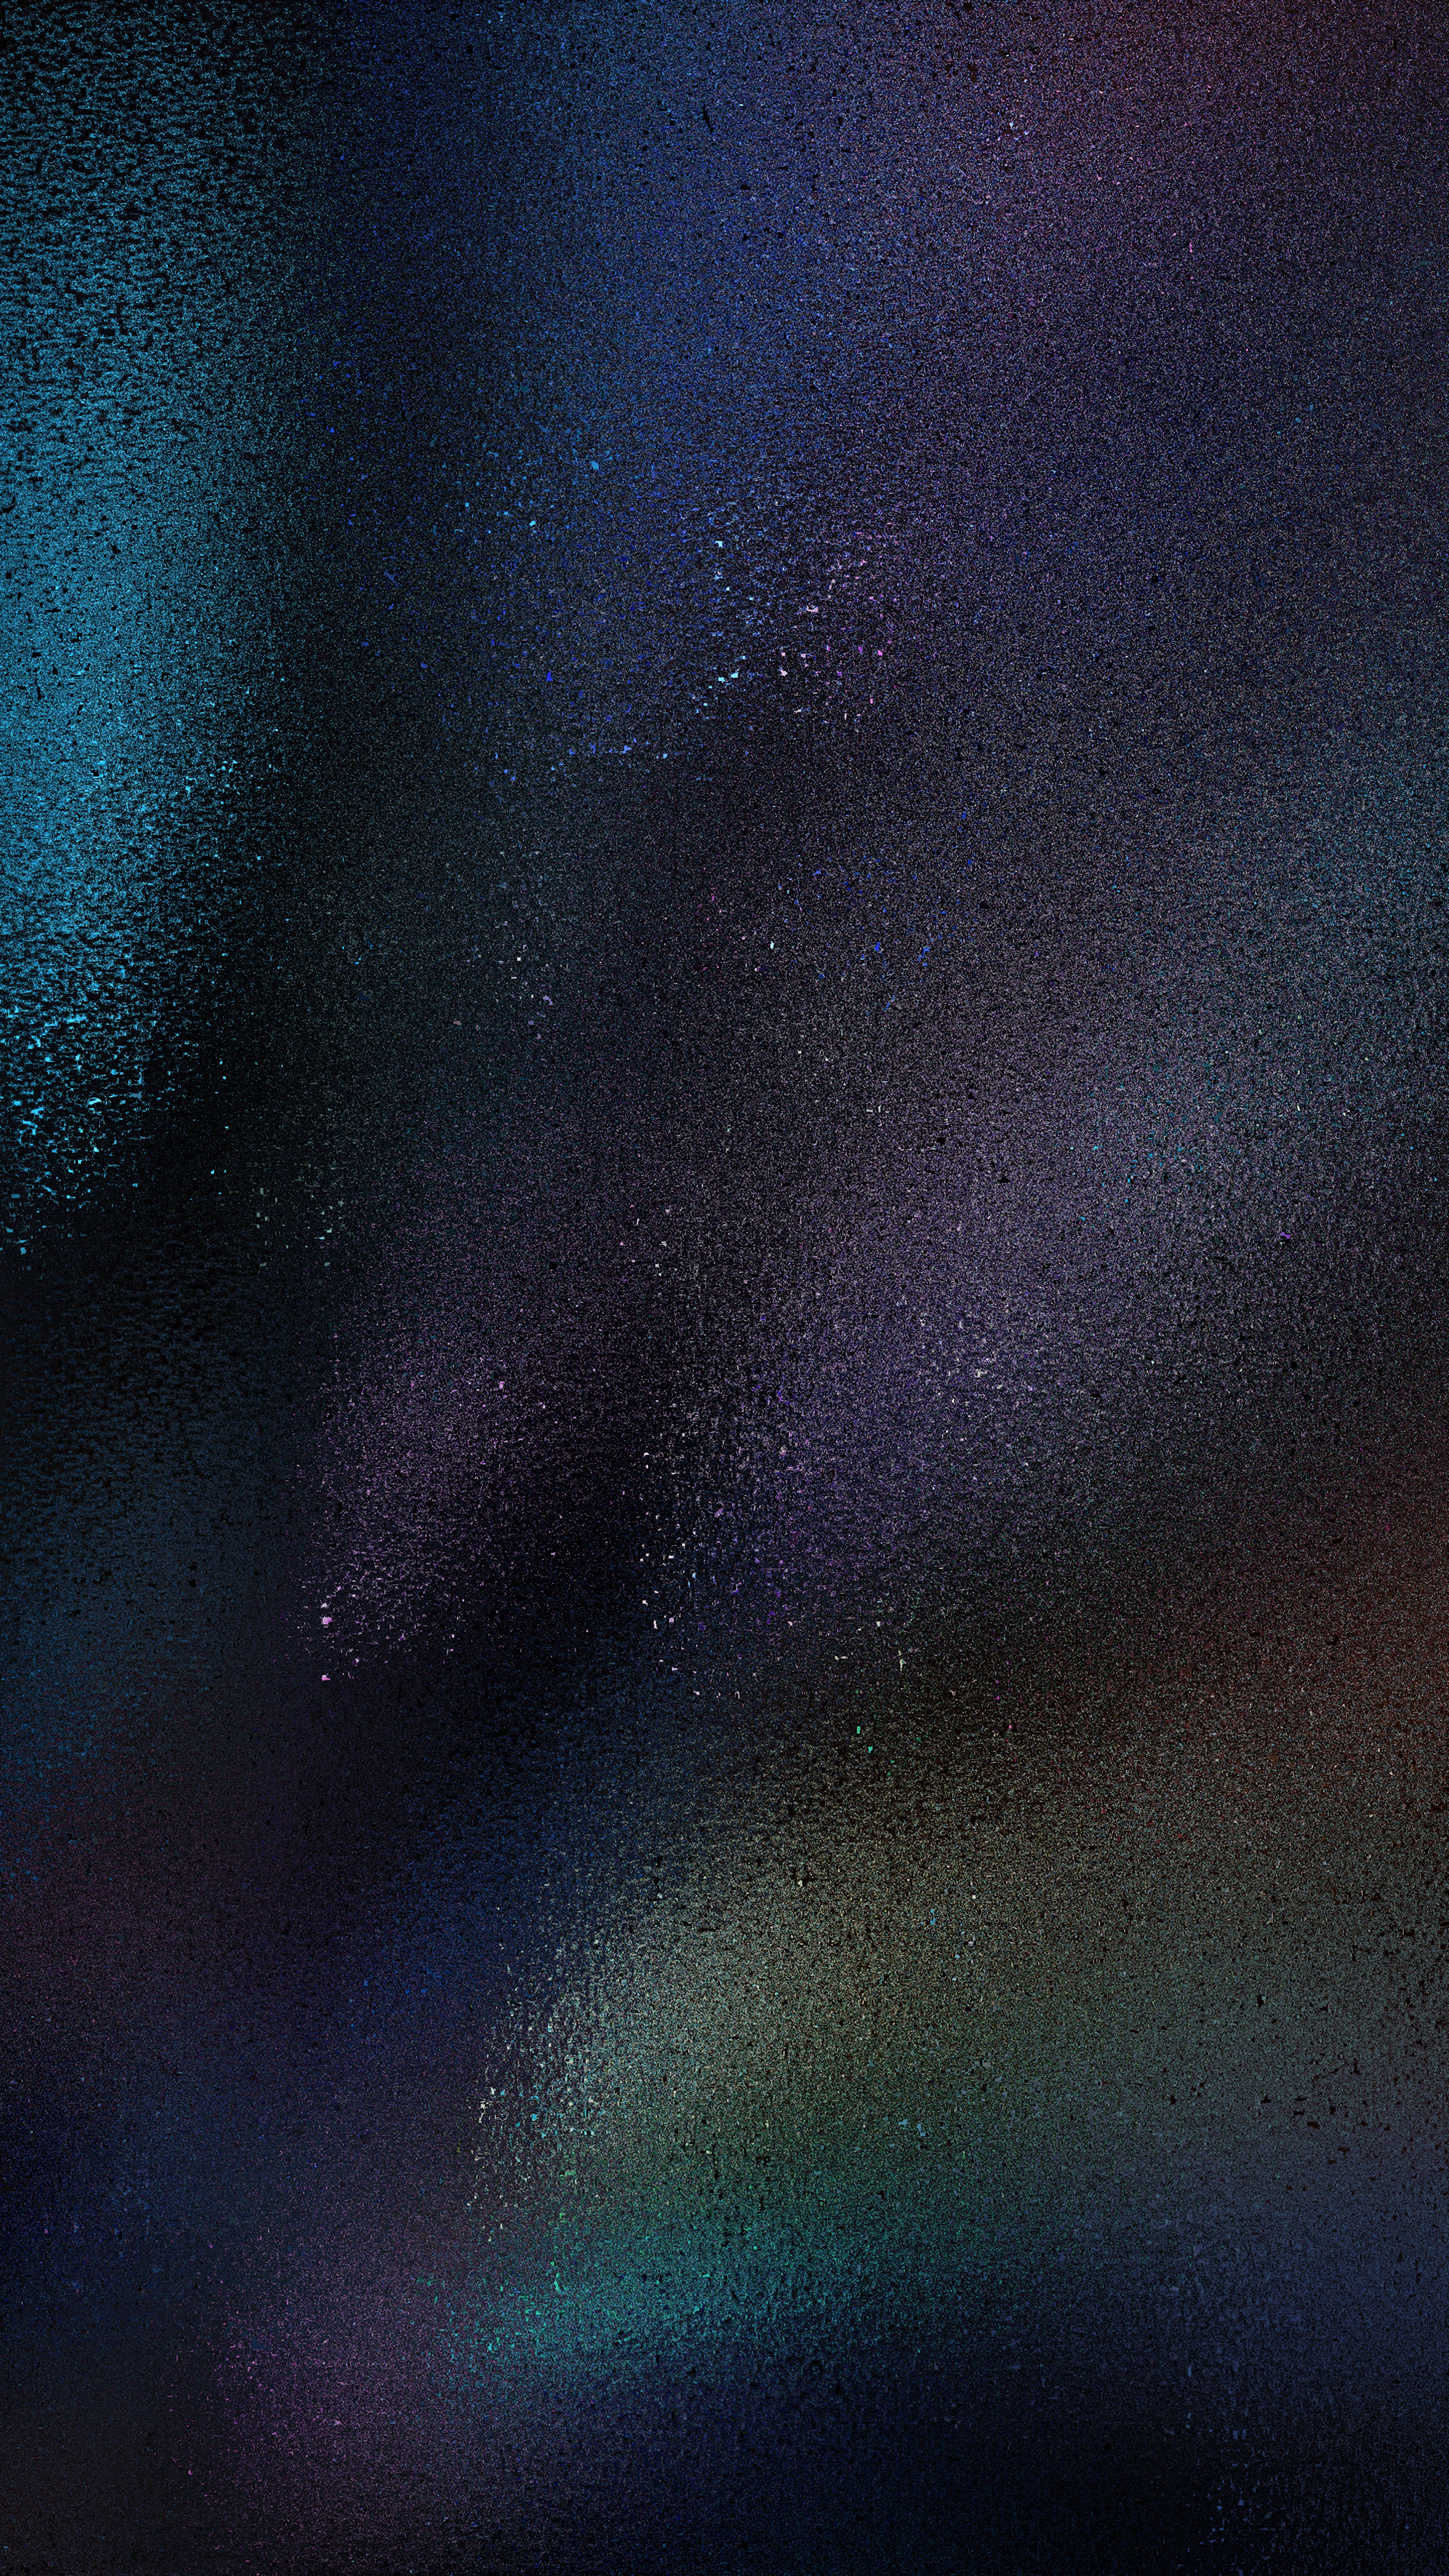 texture, fogged up, dark, textures, blur, smooth, iridescent, shades, weeping Free Stock Photo